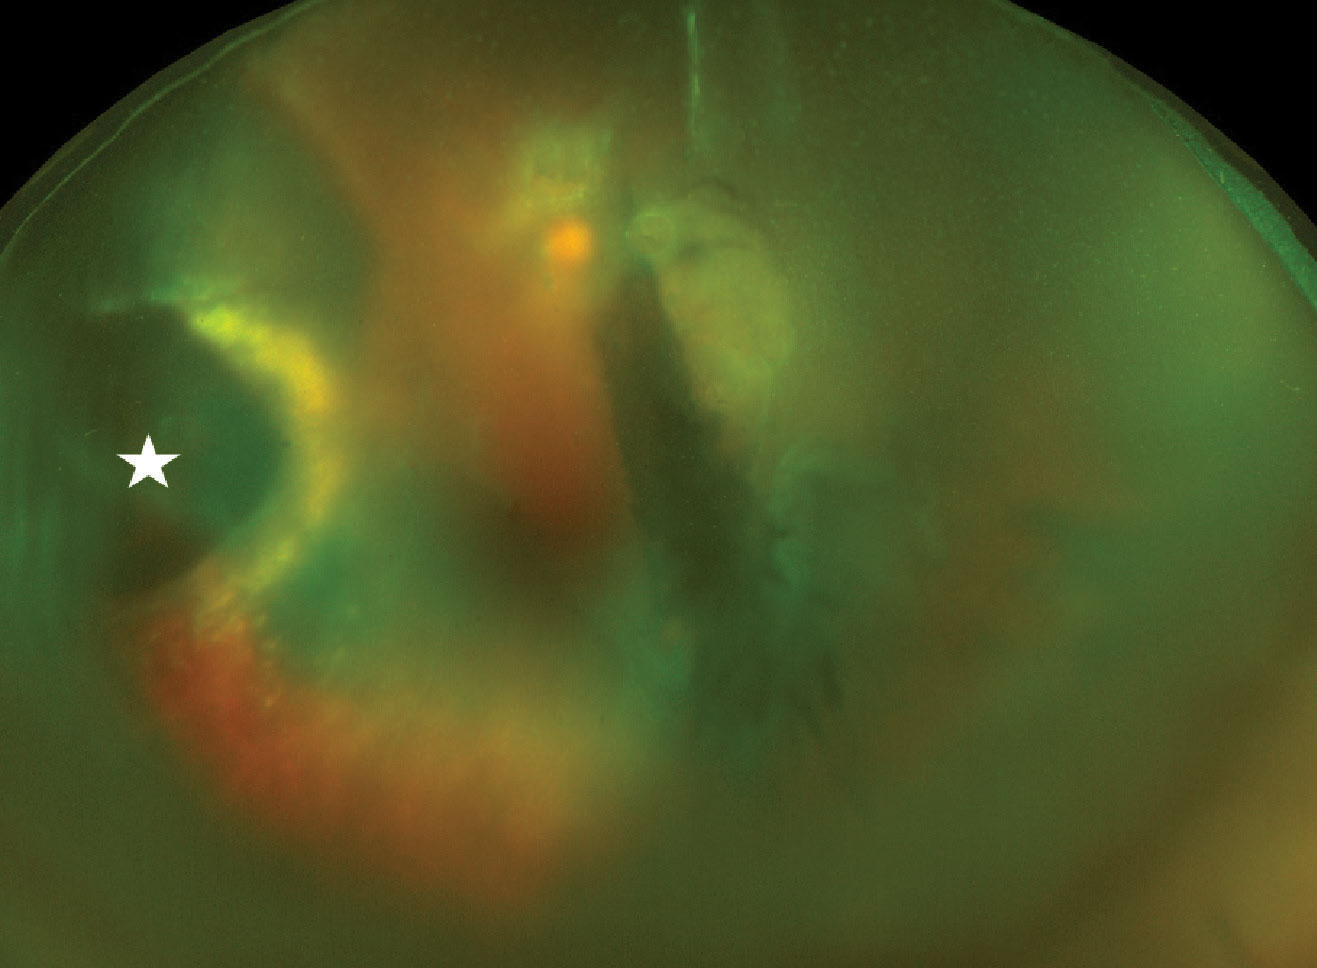 Widefield fundus photo of the left eye on presentation. There is dispersed vitreous hemorrhage blocking the view partially, but a multilayered hemorrhagic lesion (white star) on the left side of the image can be visualized. There is surrounding exudation seen as a yellowish glow.